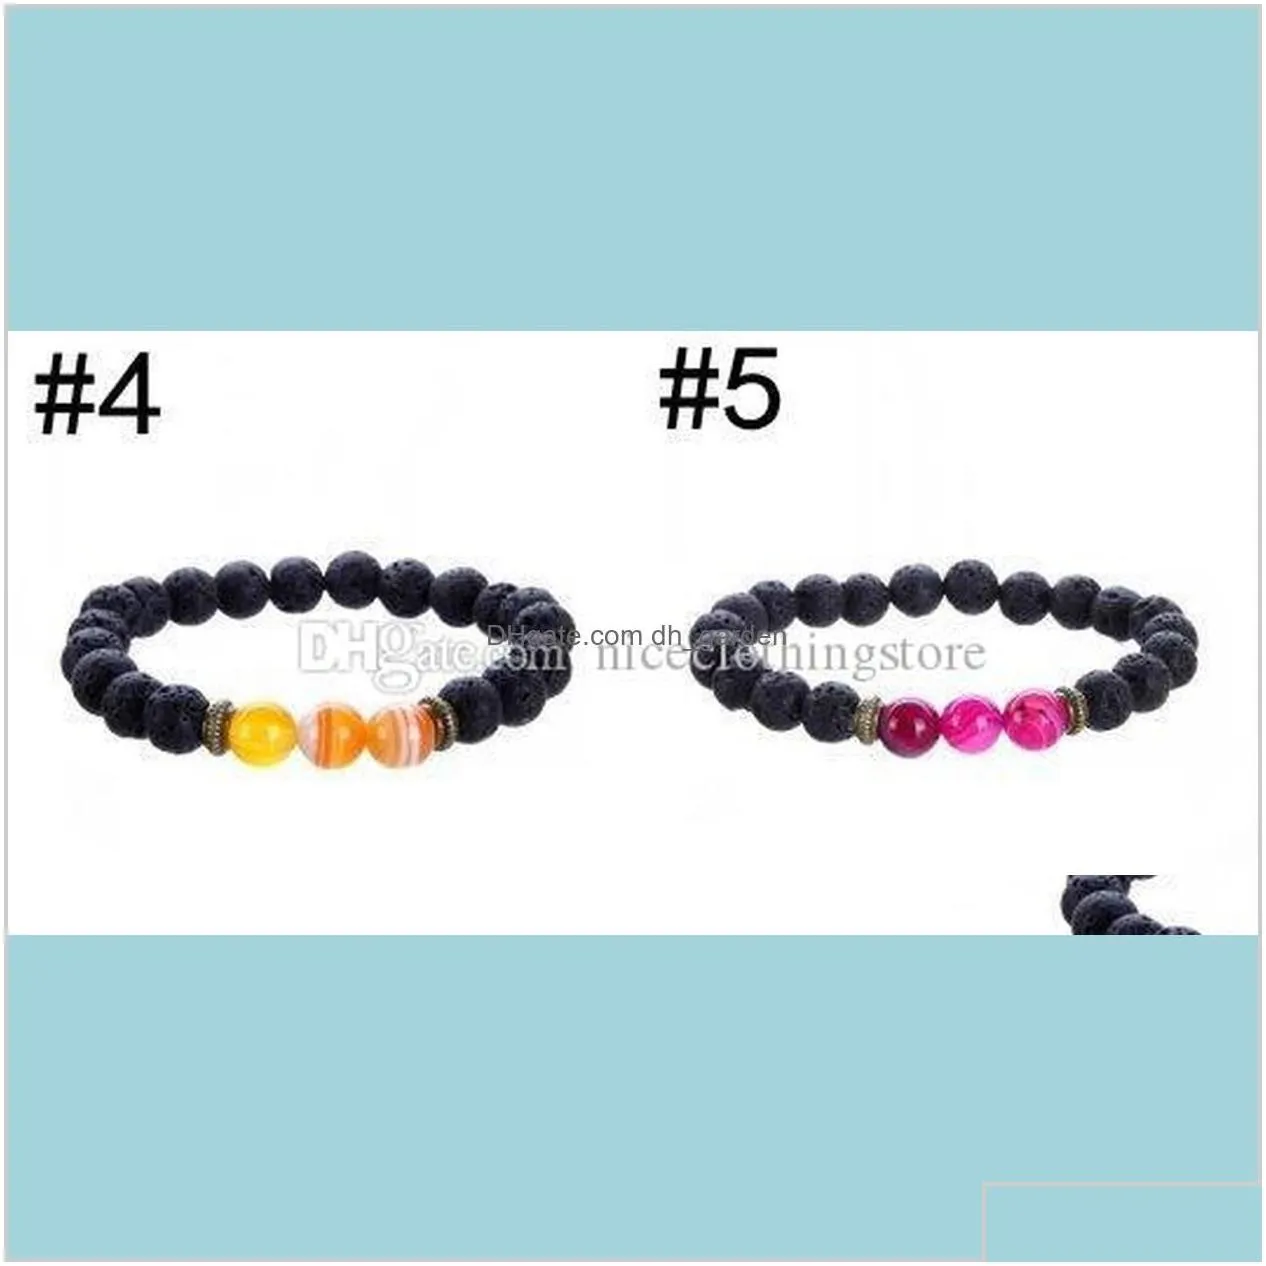 Women Mens Casual Charm Gifts Volcano Bracelets Fashion Volcanic Stone Jewelry Essential Oil Diffuser F0Zyn Beaded Strands 7Bndr